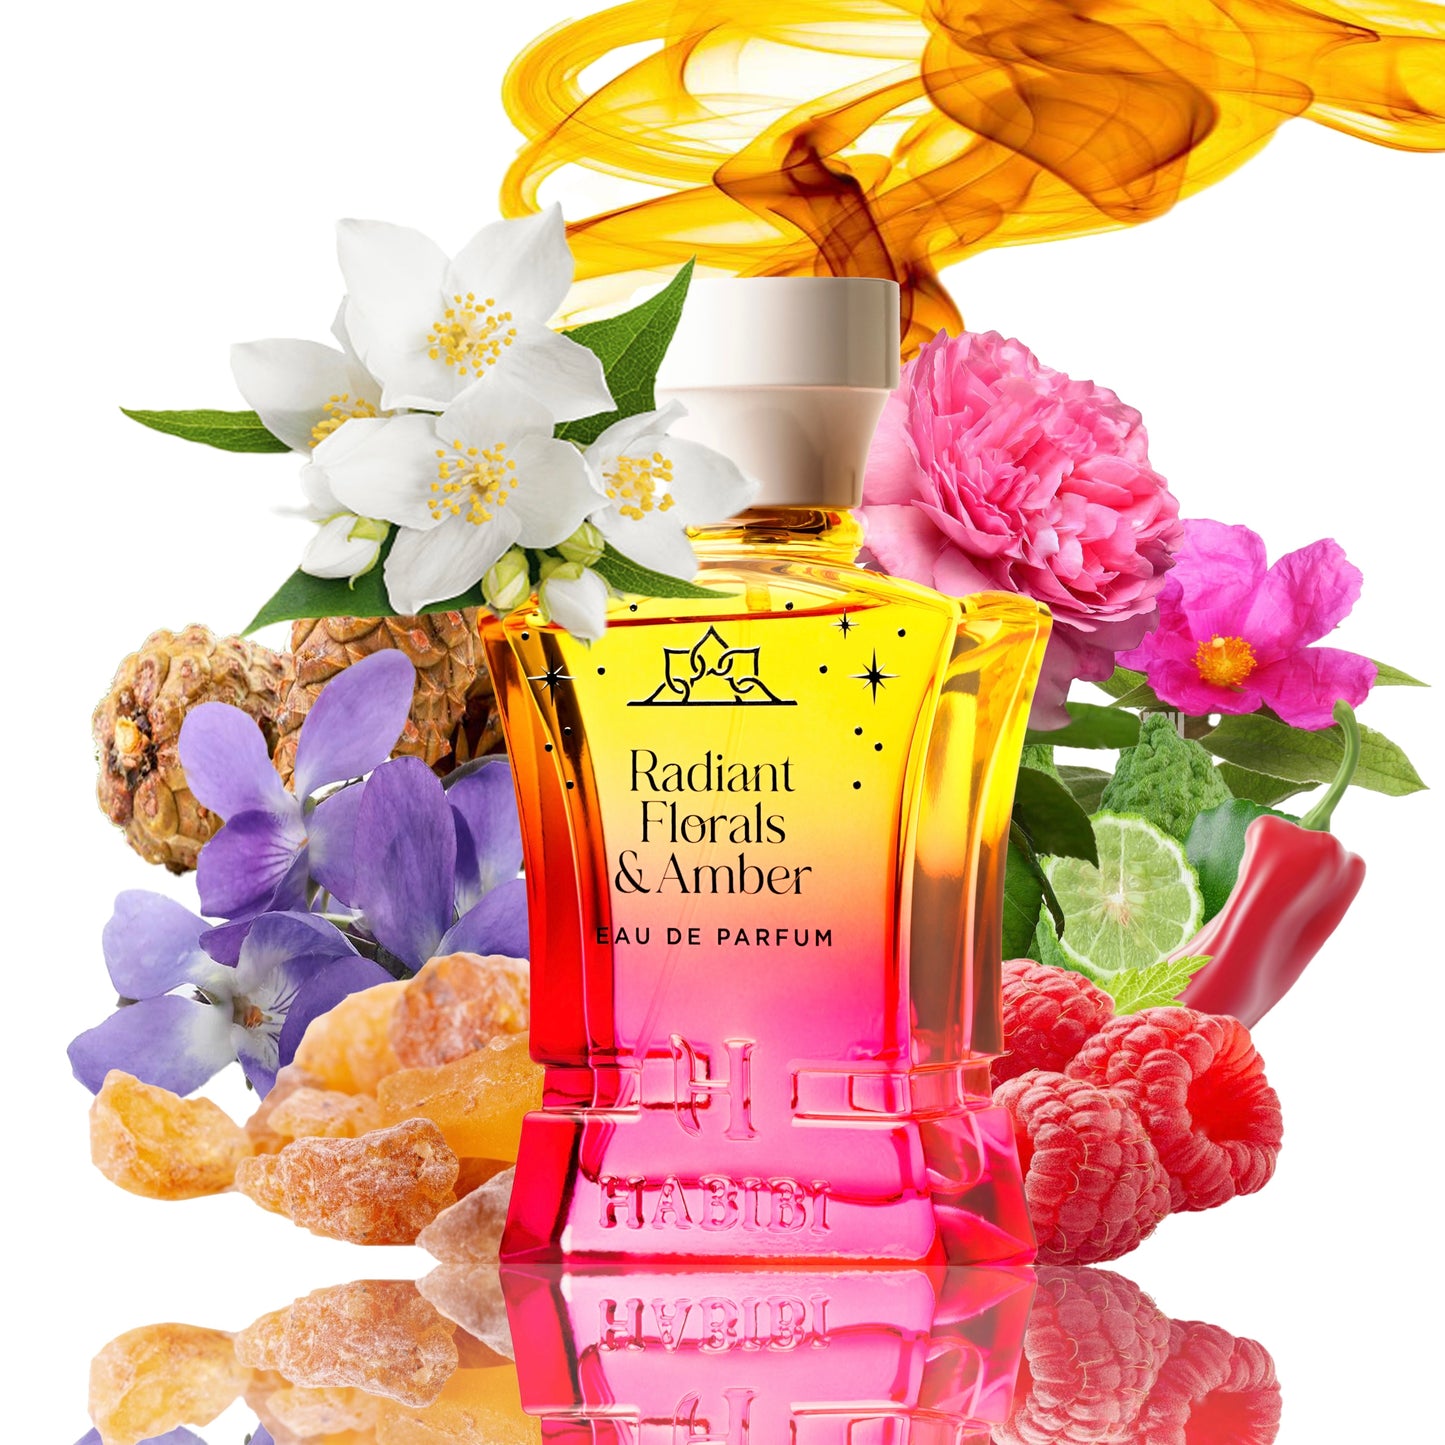 Radiant Florals & Amber for Woman